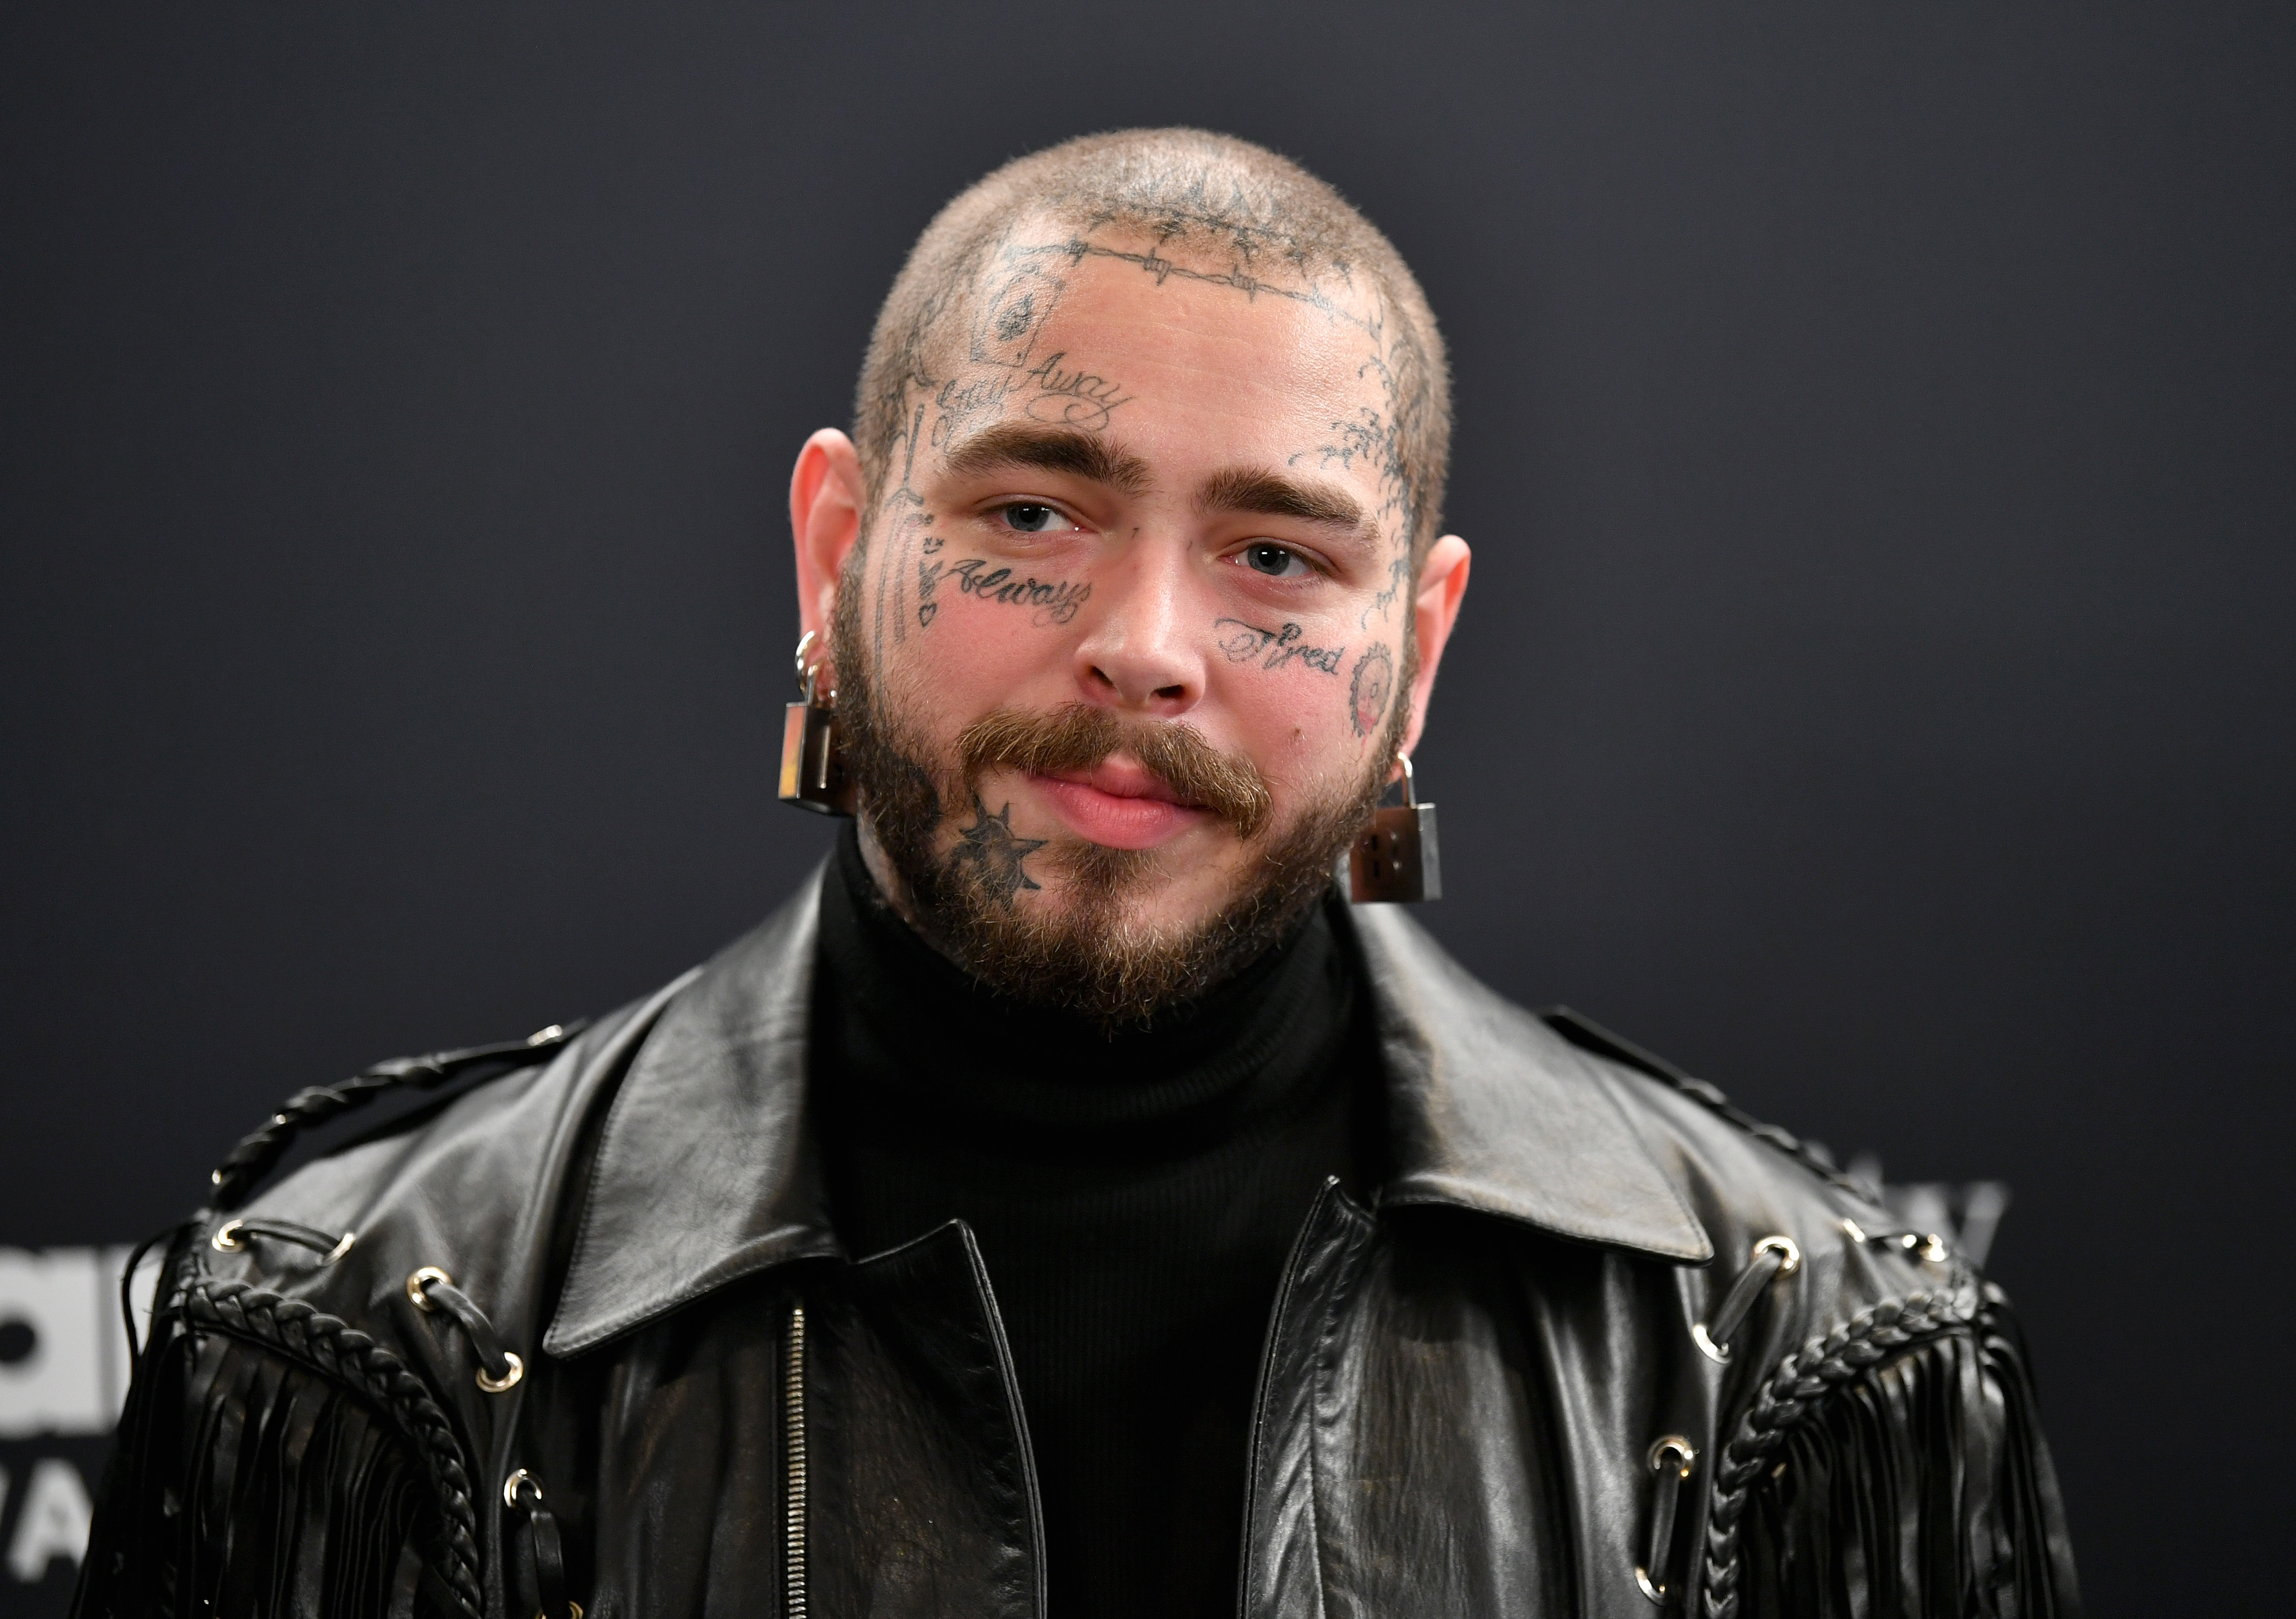 Becoming a dad has made Post Malone want to pause his career